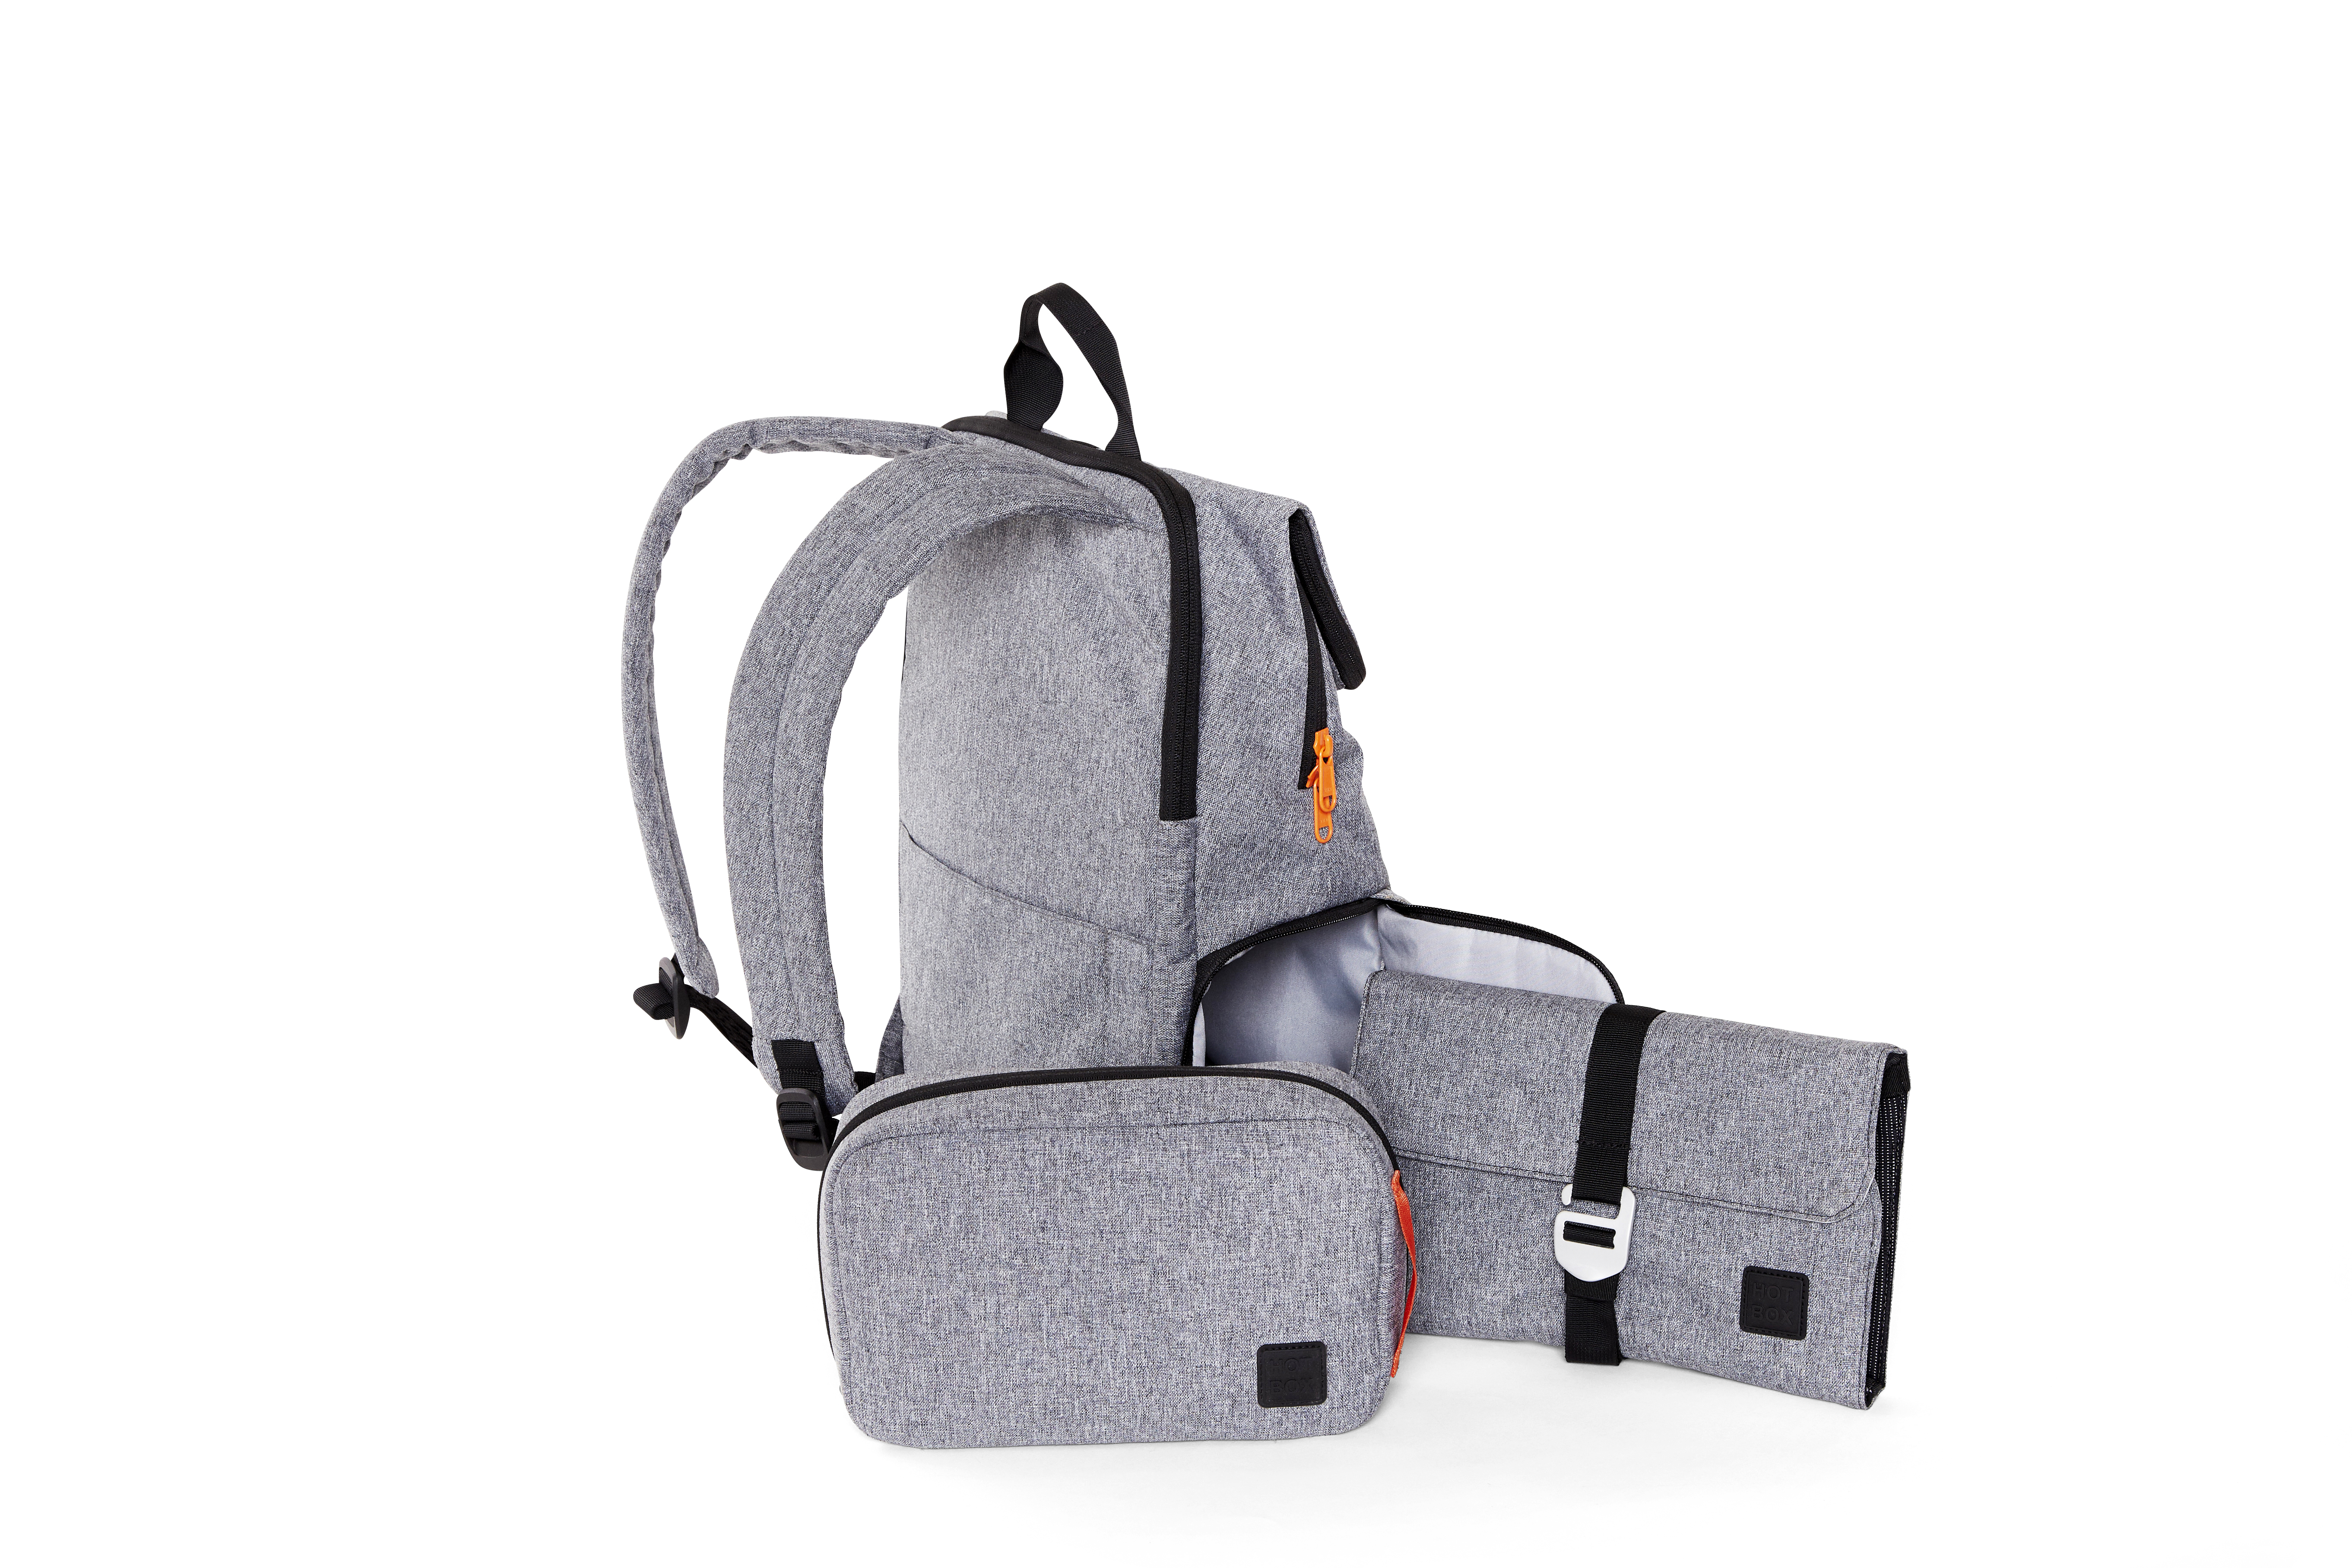 Shuttle with Tech Pouch and Tech Folio 2 1